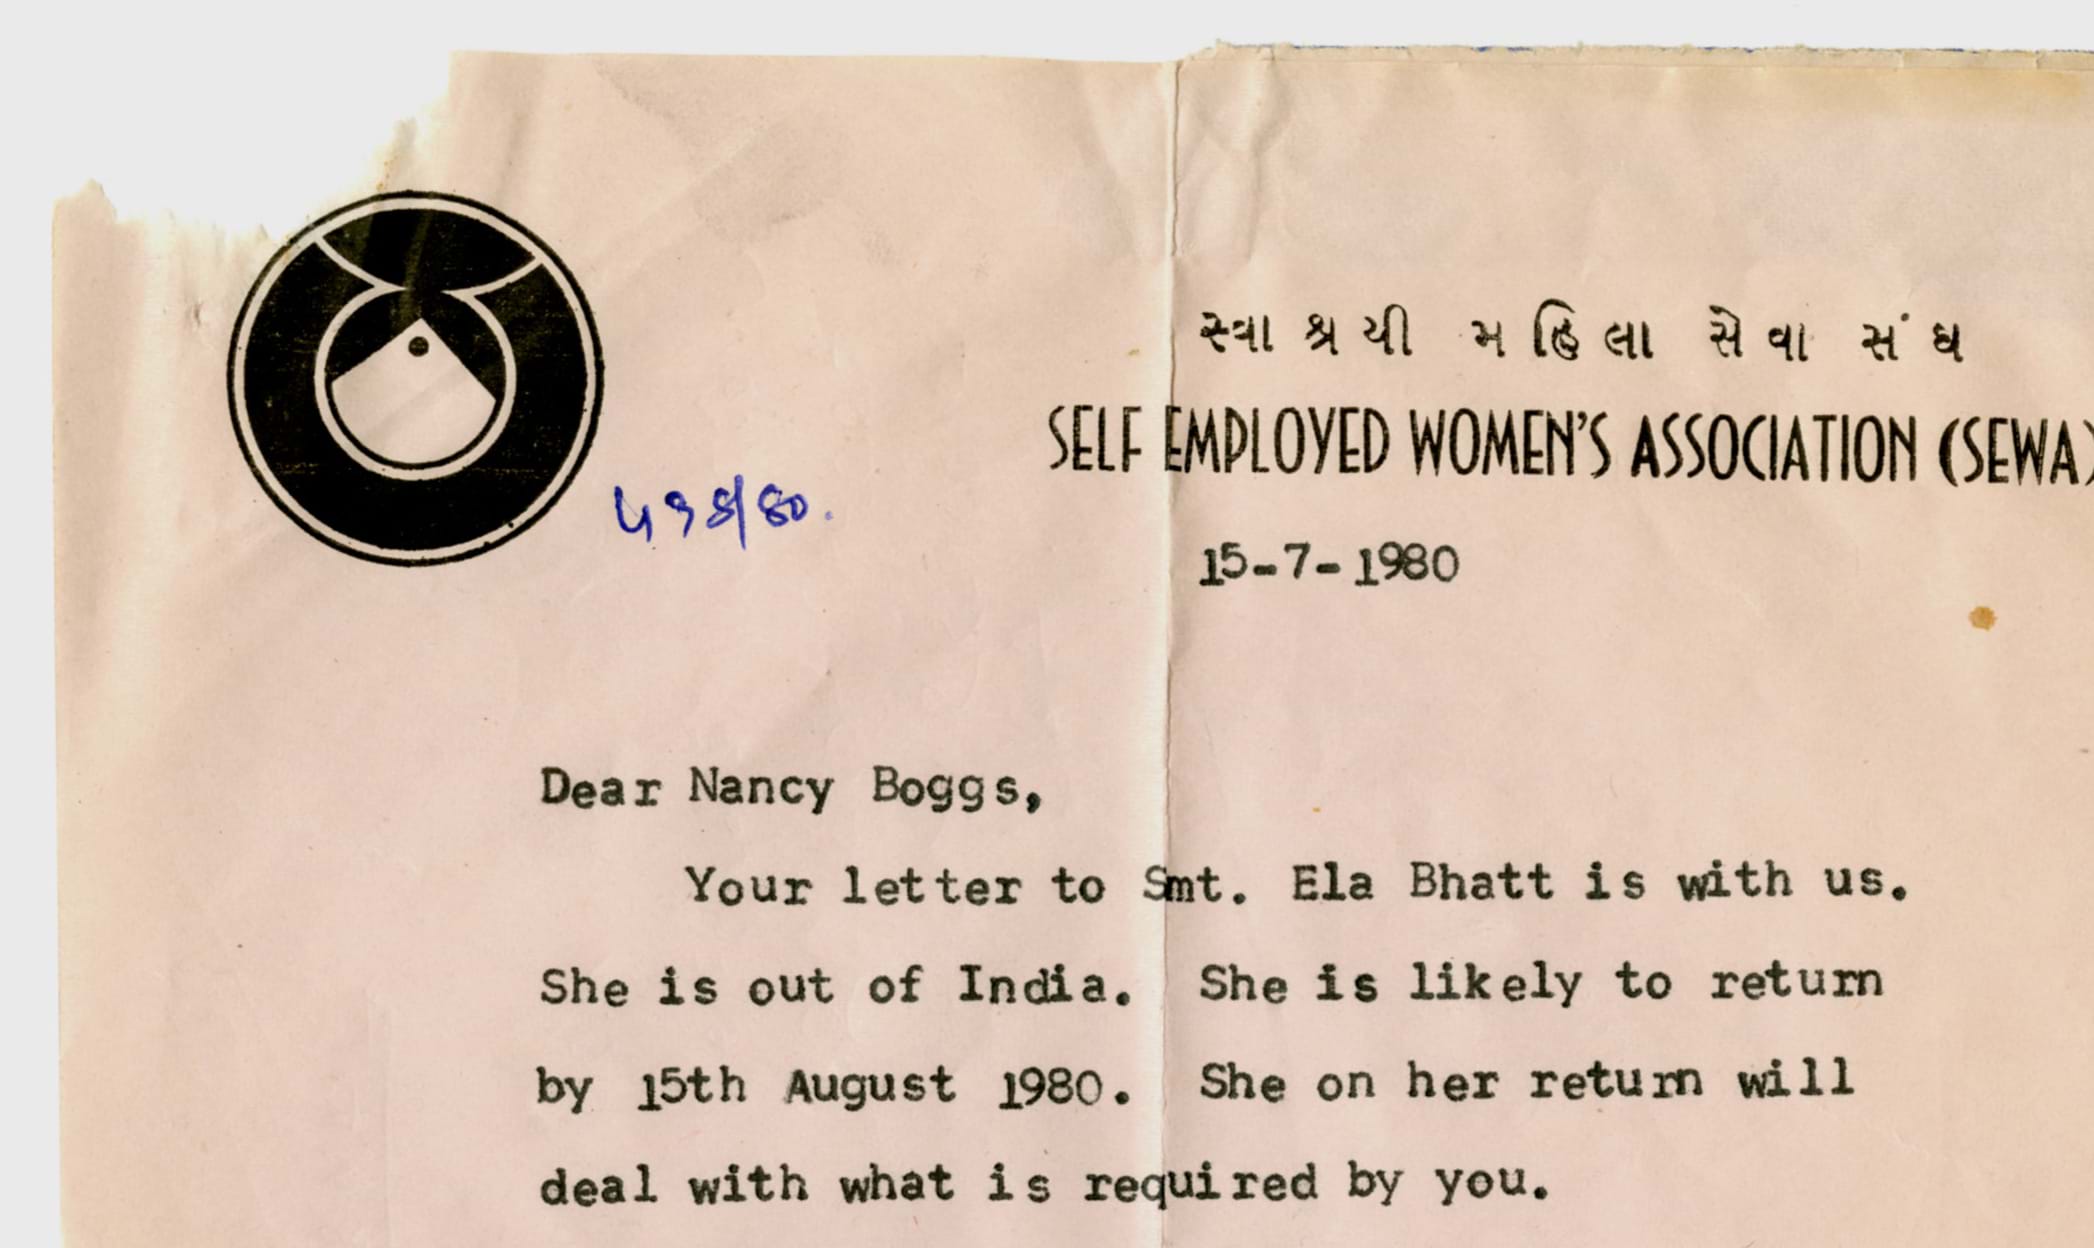 A close up of a typewritten document on Self Employed Women's Association letterhead that reads, "Dear Nancy Boggs, Your letter to Ela Bhatt is with us. She is out of India. She is likely to return by 15th August 1980. She on her return will deal with what is required by you.